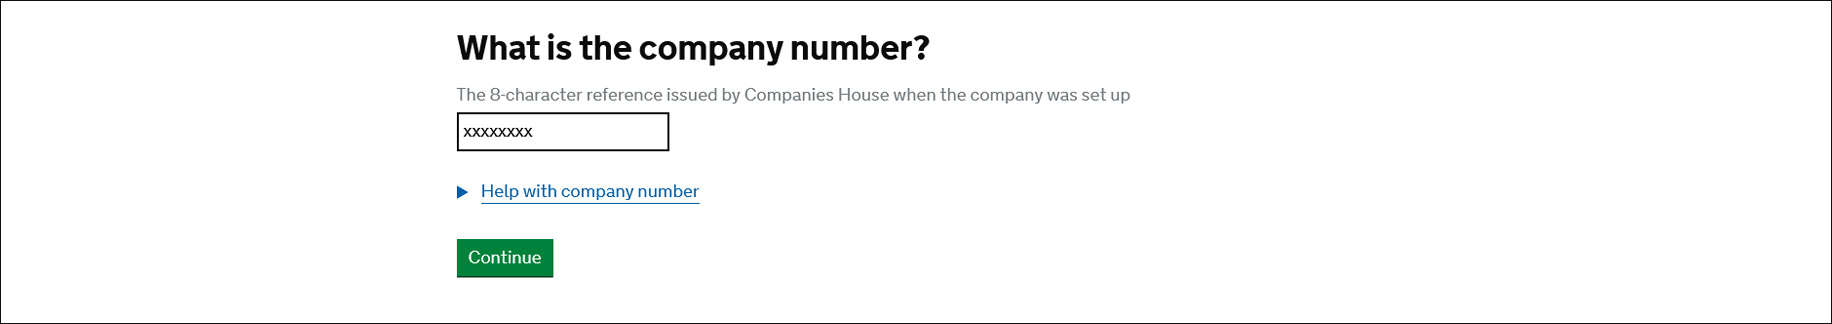 What is the company number?